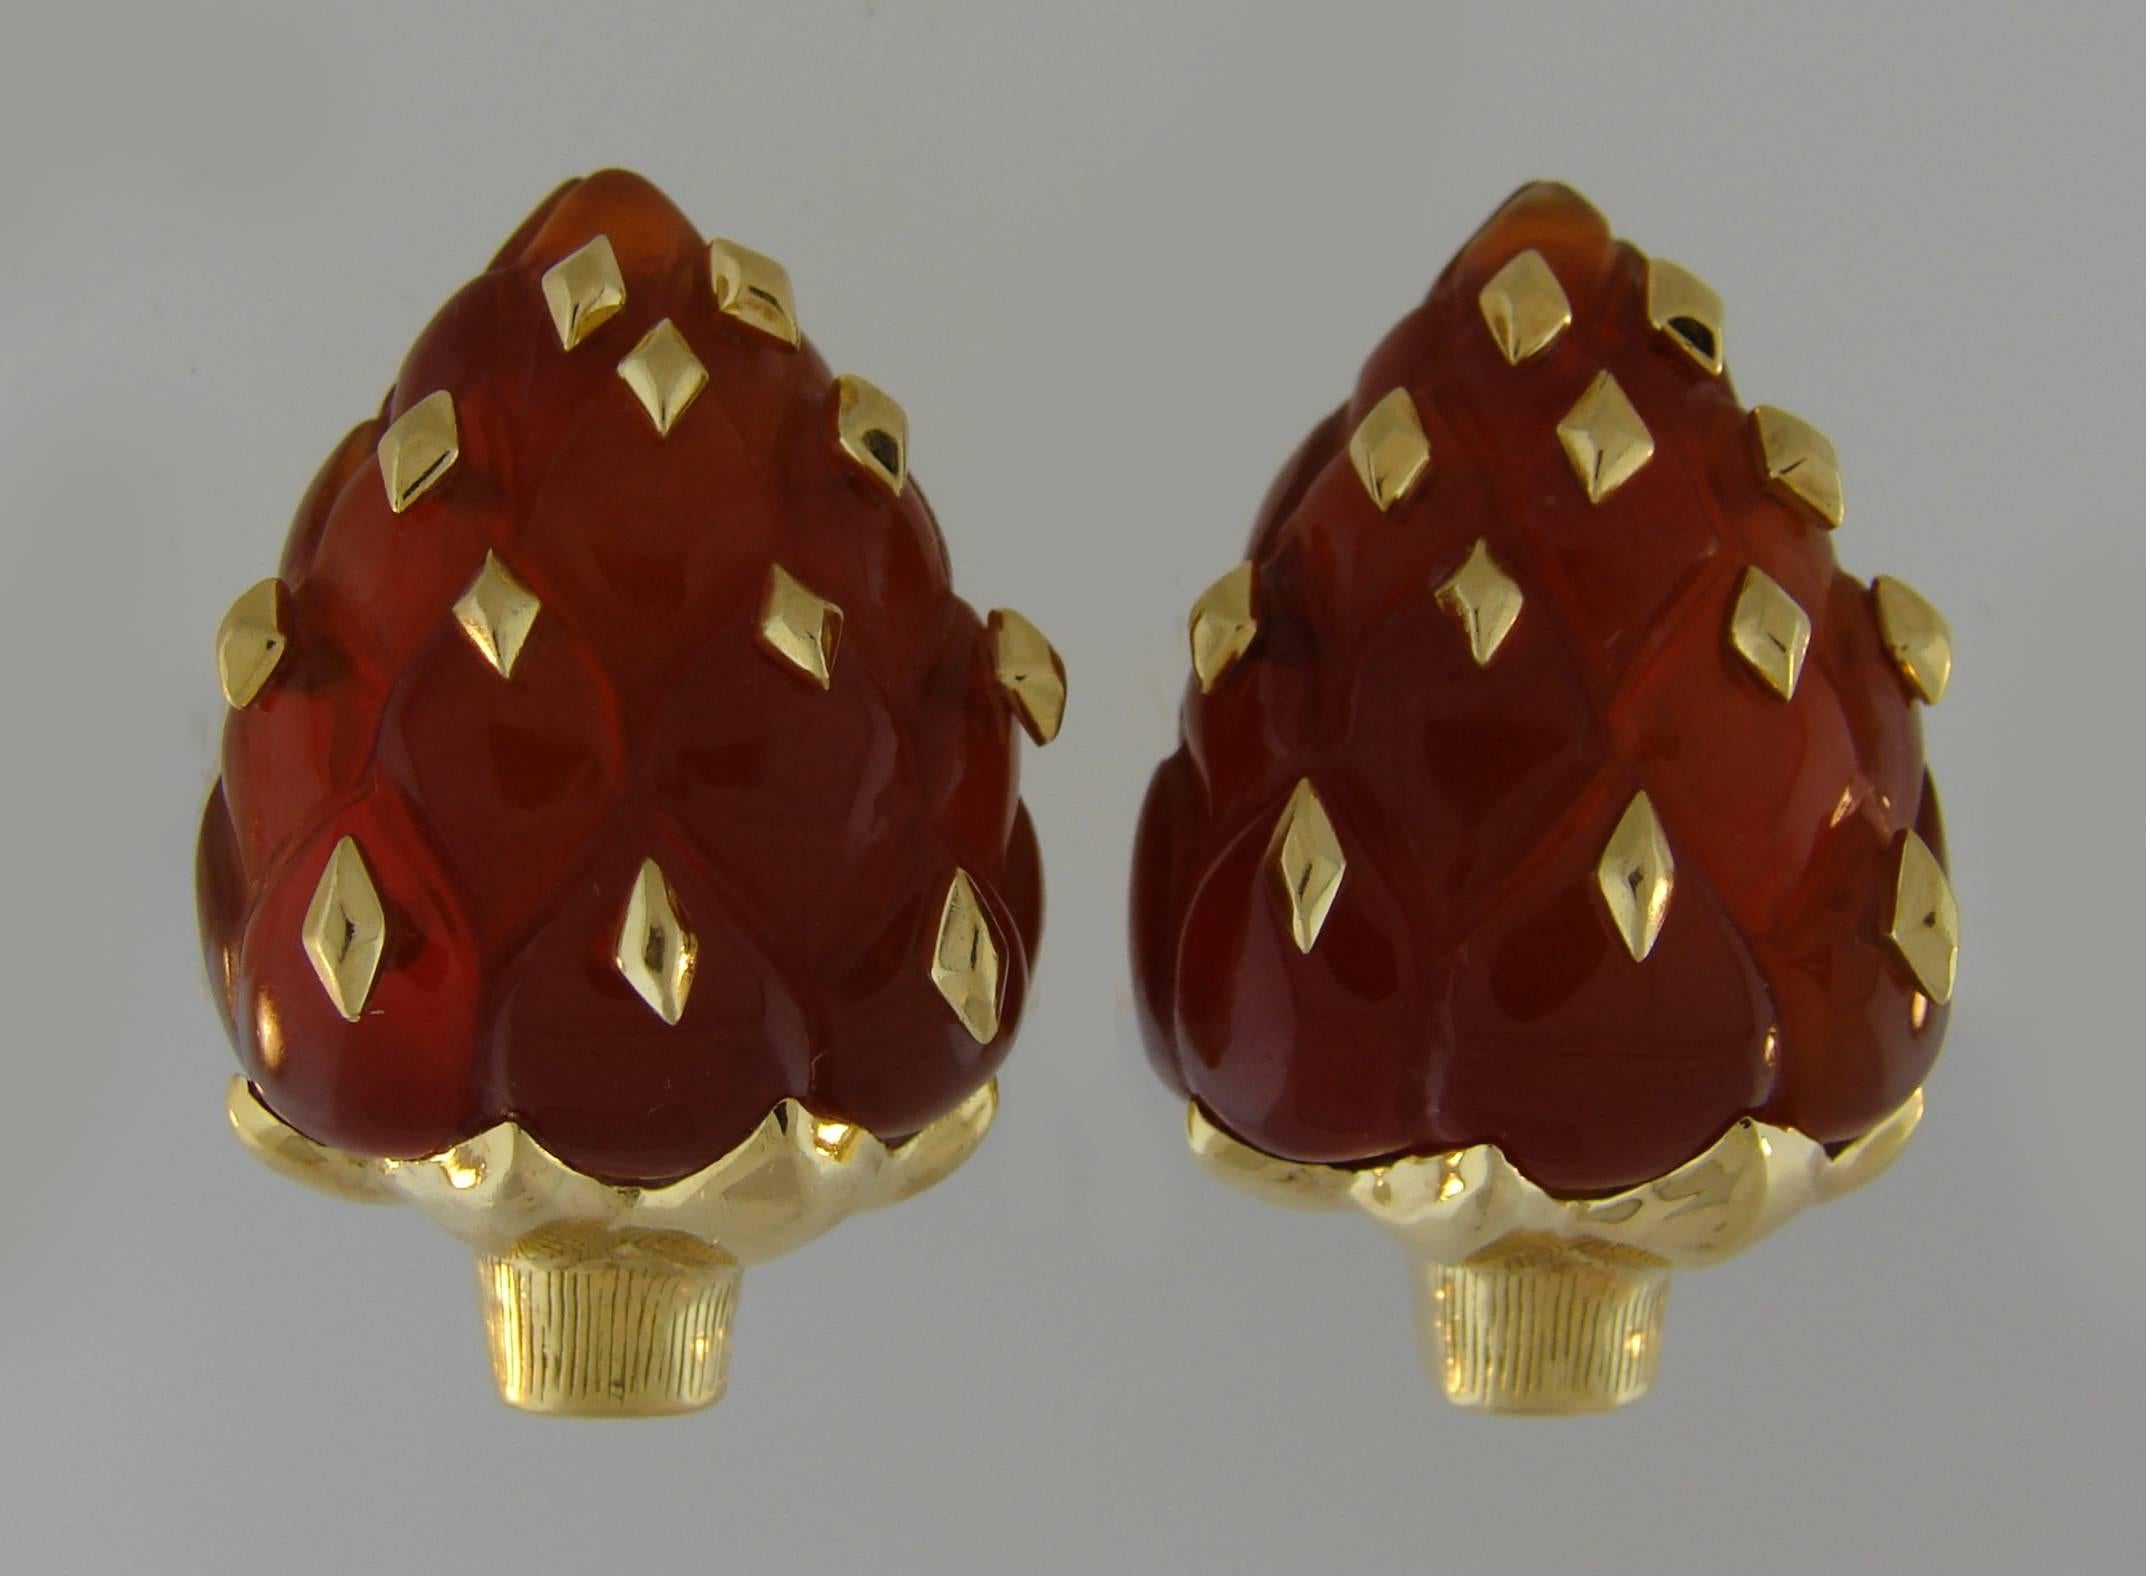 Lovely fun earrings created by Seaman Schepps in the 1970's. Colorful, chic and wearable, the earrings are a great addition to your jewelry collection. 
Made of 18 karat yellow gold and carnelian.
Measure 1-1/4 x 3/4 x 1/2 inch (3.2 x 2 x 1.2 cm)